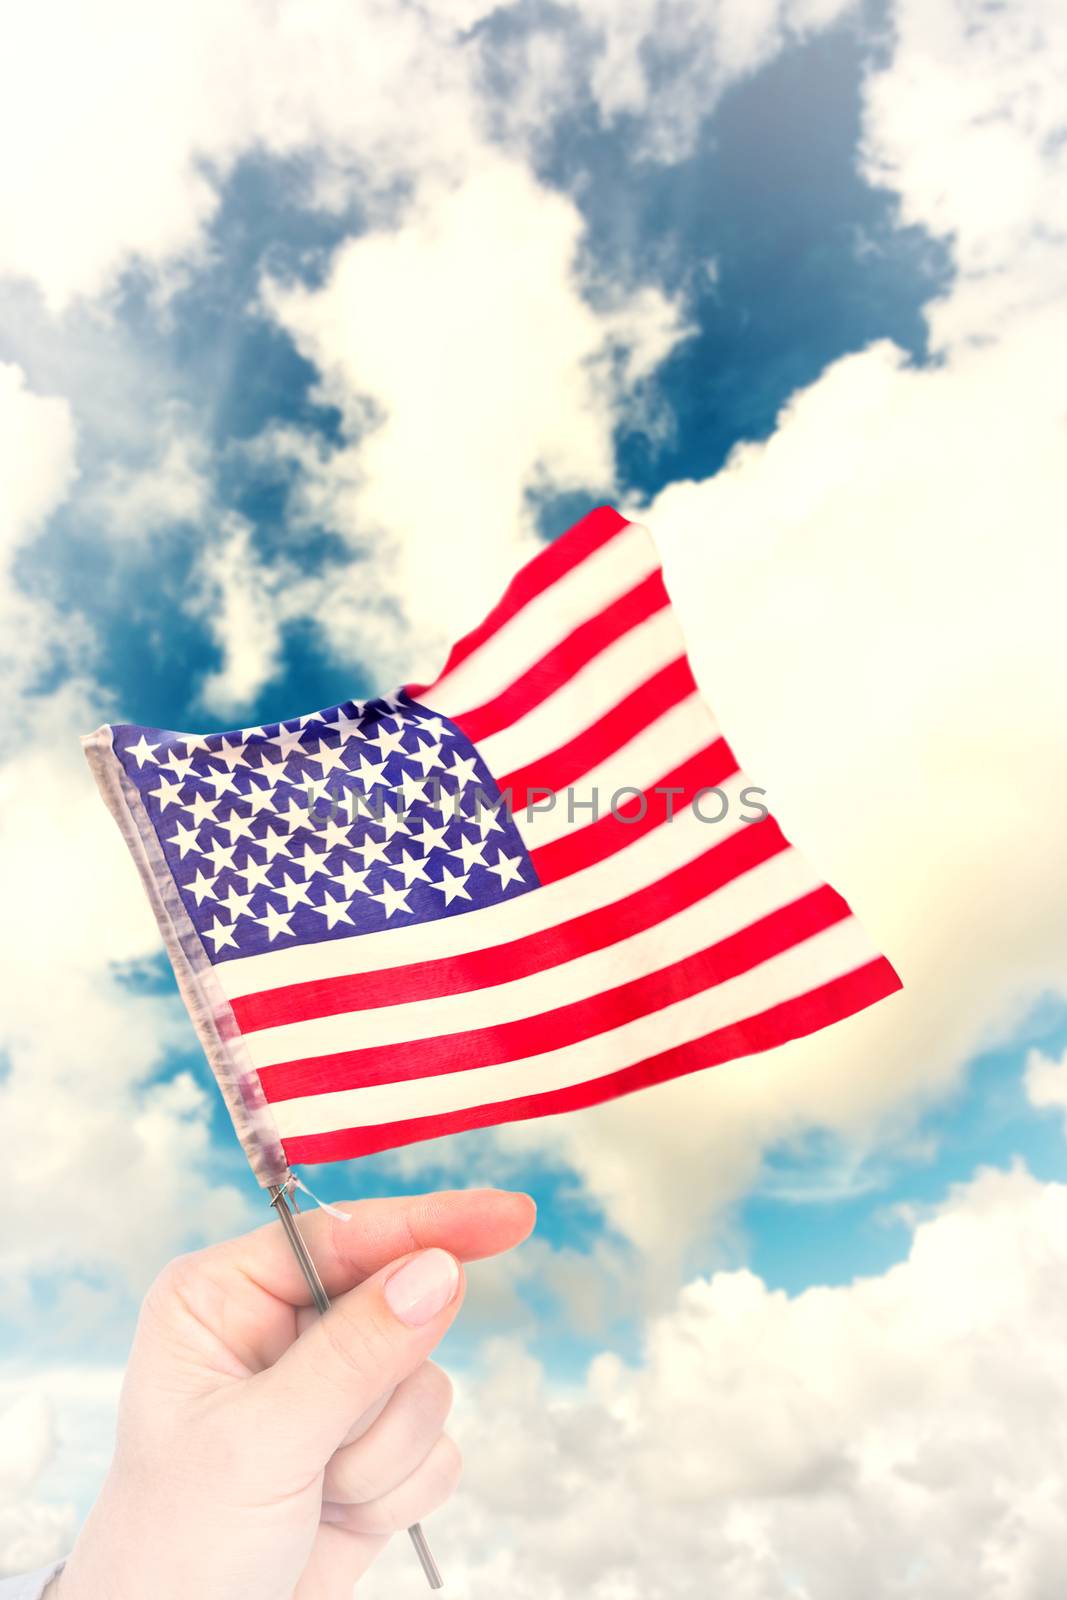 Hand waving american flag against blue sky with white clouds